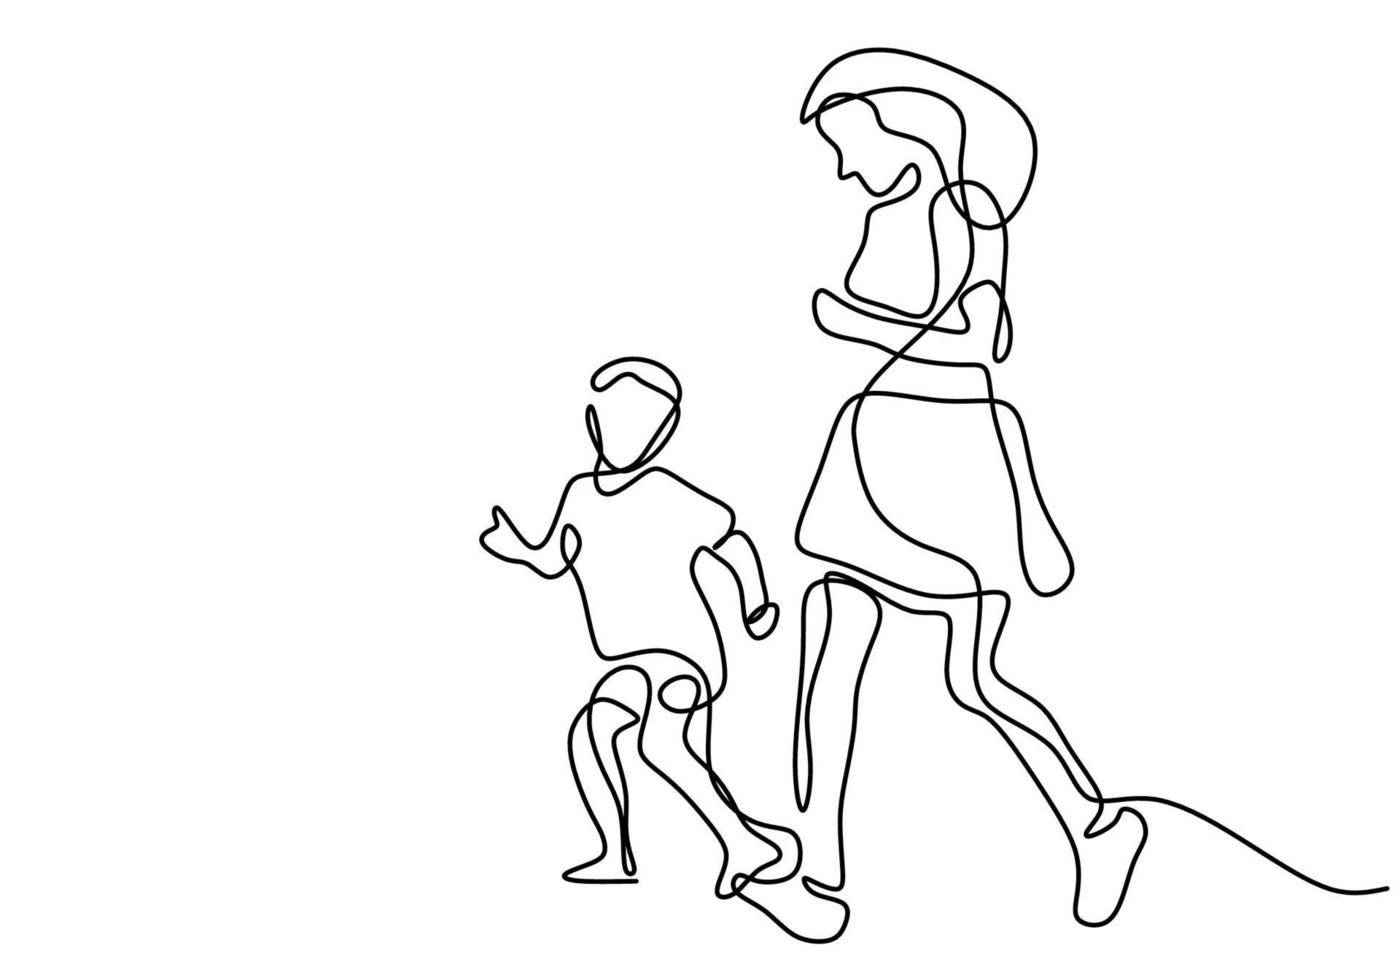 Continuous line drawing of young mother run together with her kid in the morning. Happy cheerful mom and son doing exercise at the field park. Family loving care concept. Vector illustration